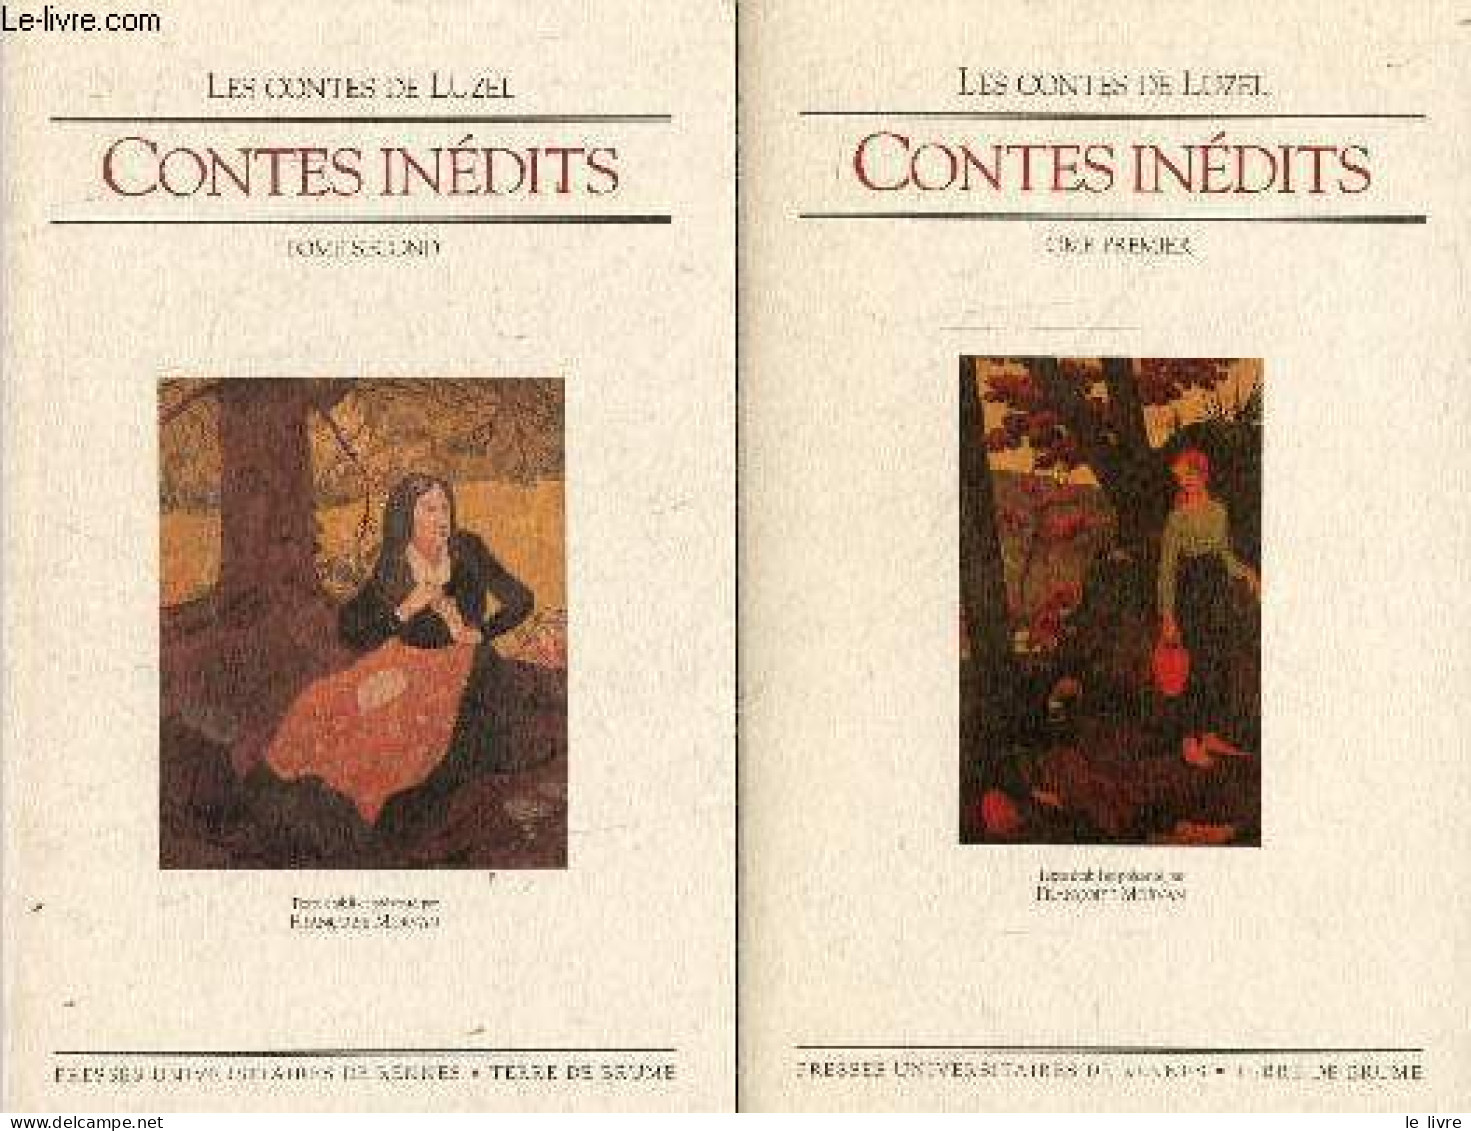 Contes Inédits - Tome 1 + Tome 2 (2 Volumes). - Luzel - 1995 - Valérian